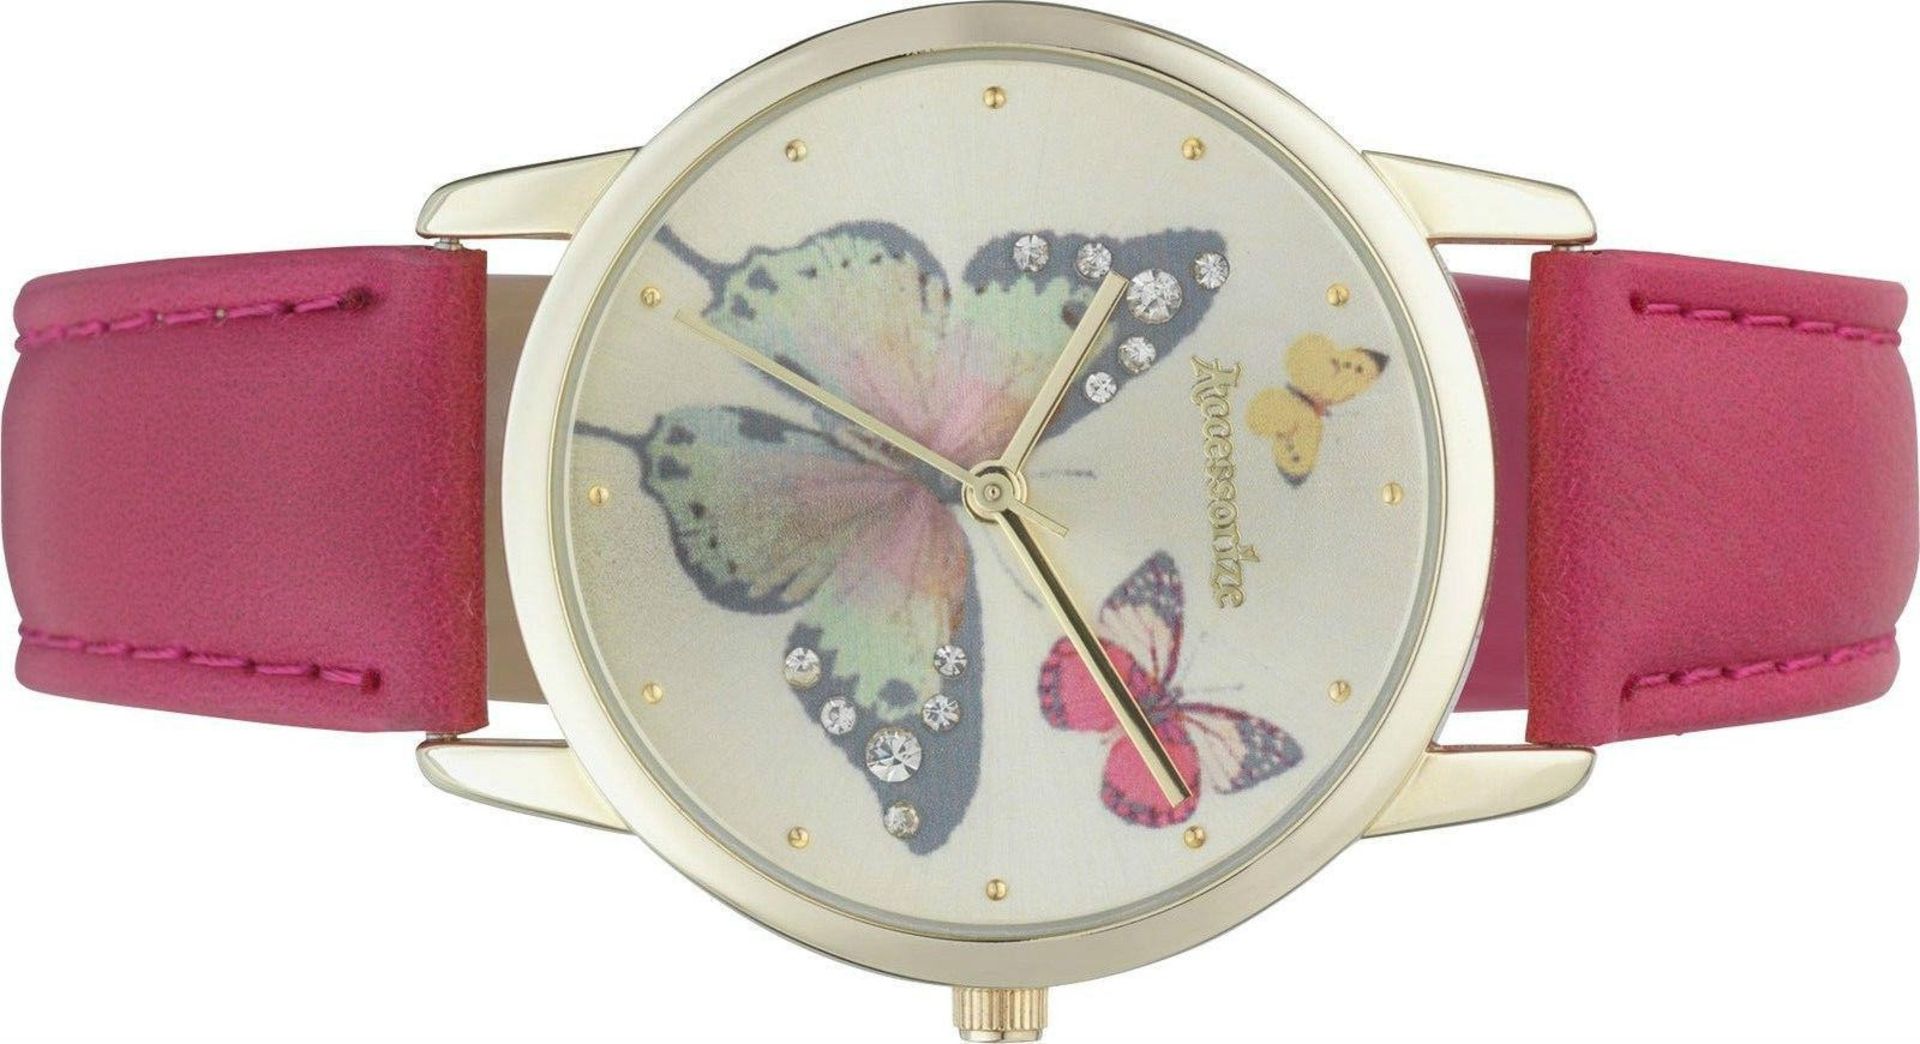 + VAT Brand New Ladies Accessorize Butterfly Dial Watch With Leather Strap - RRP £17.50